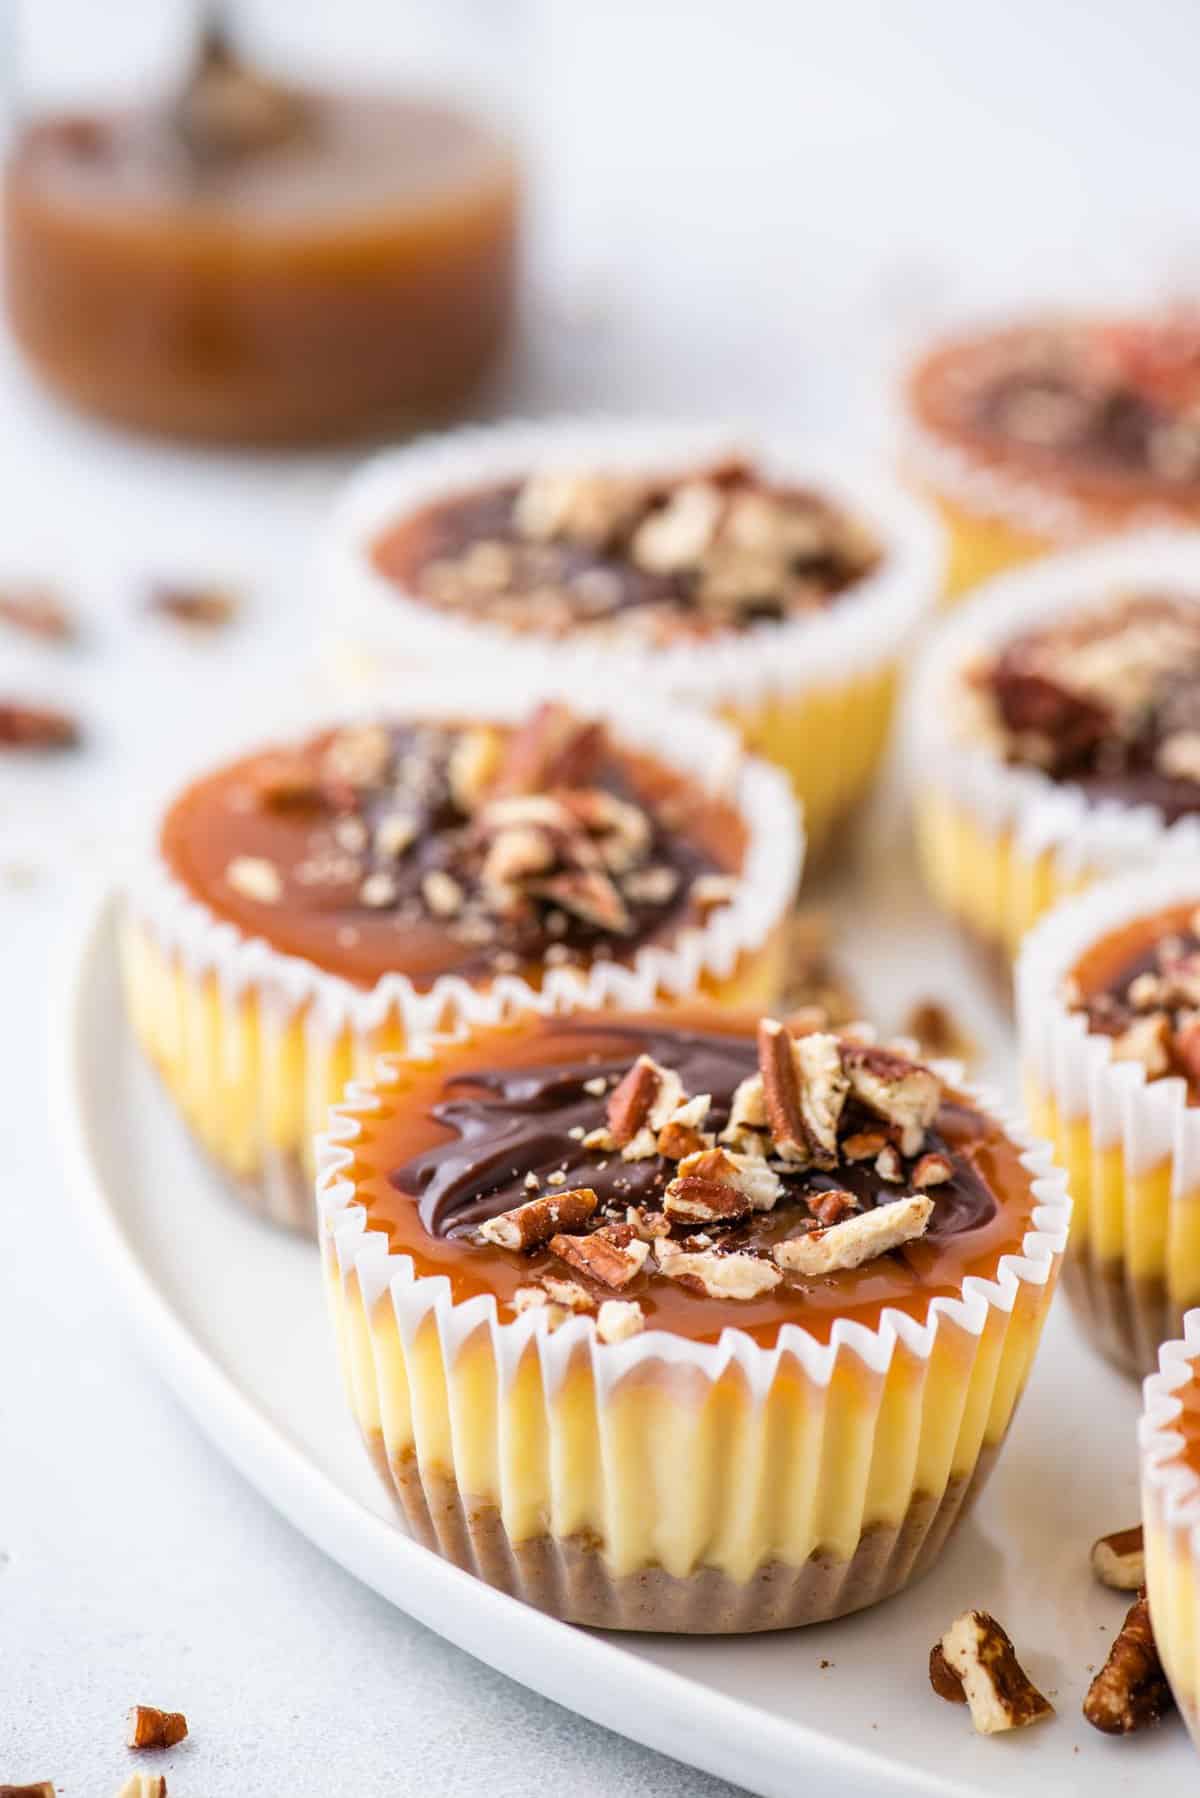 mini cheesecakes topped with caramel, chocolate and chopped pecans arranged on white tray